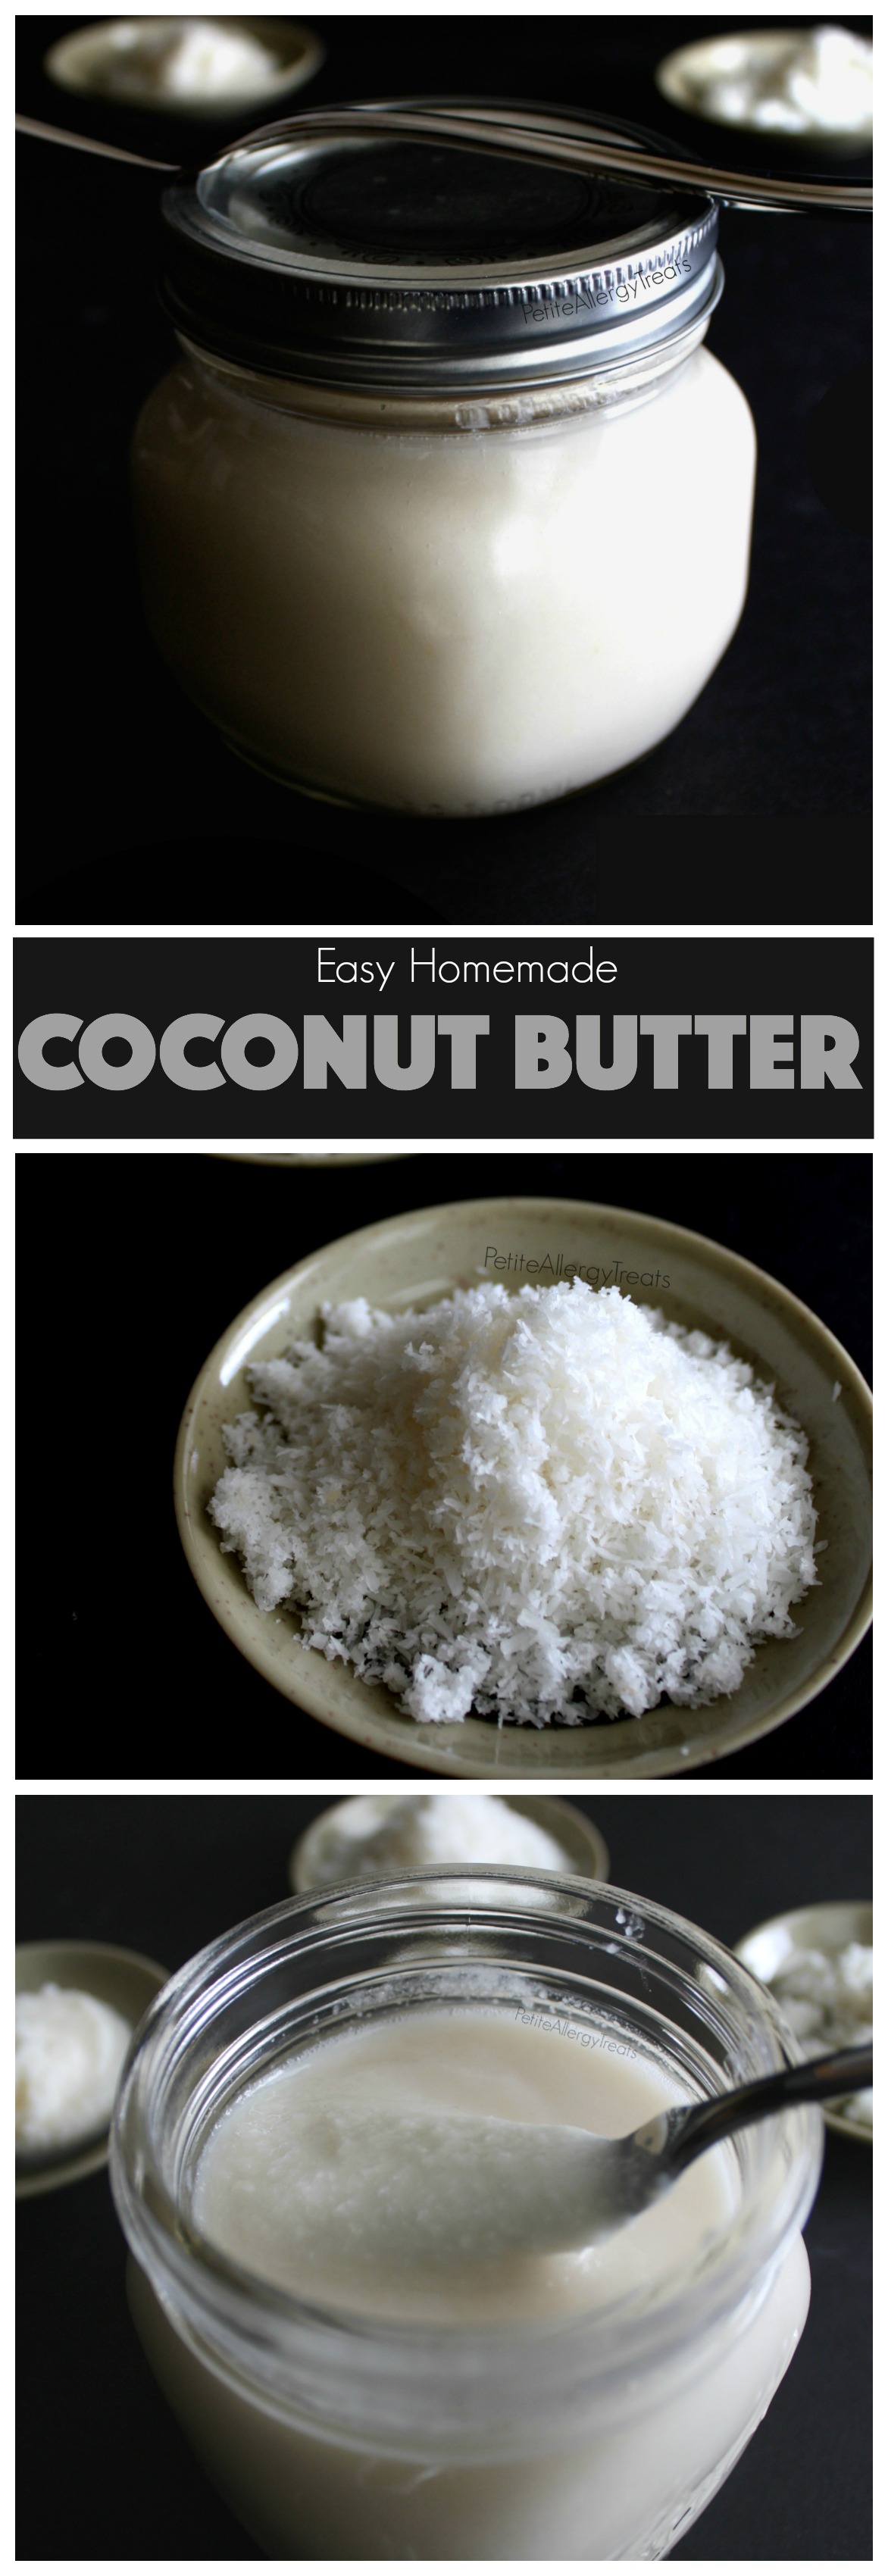 Homemade Coconut Butter Recipe (gluten free vegan raw)- Healthy easy coconut butter with just 2 ingredients! Naturally gluten free and vegan!